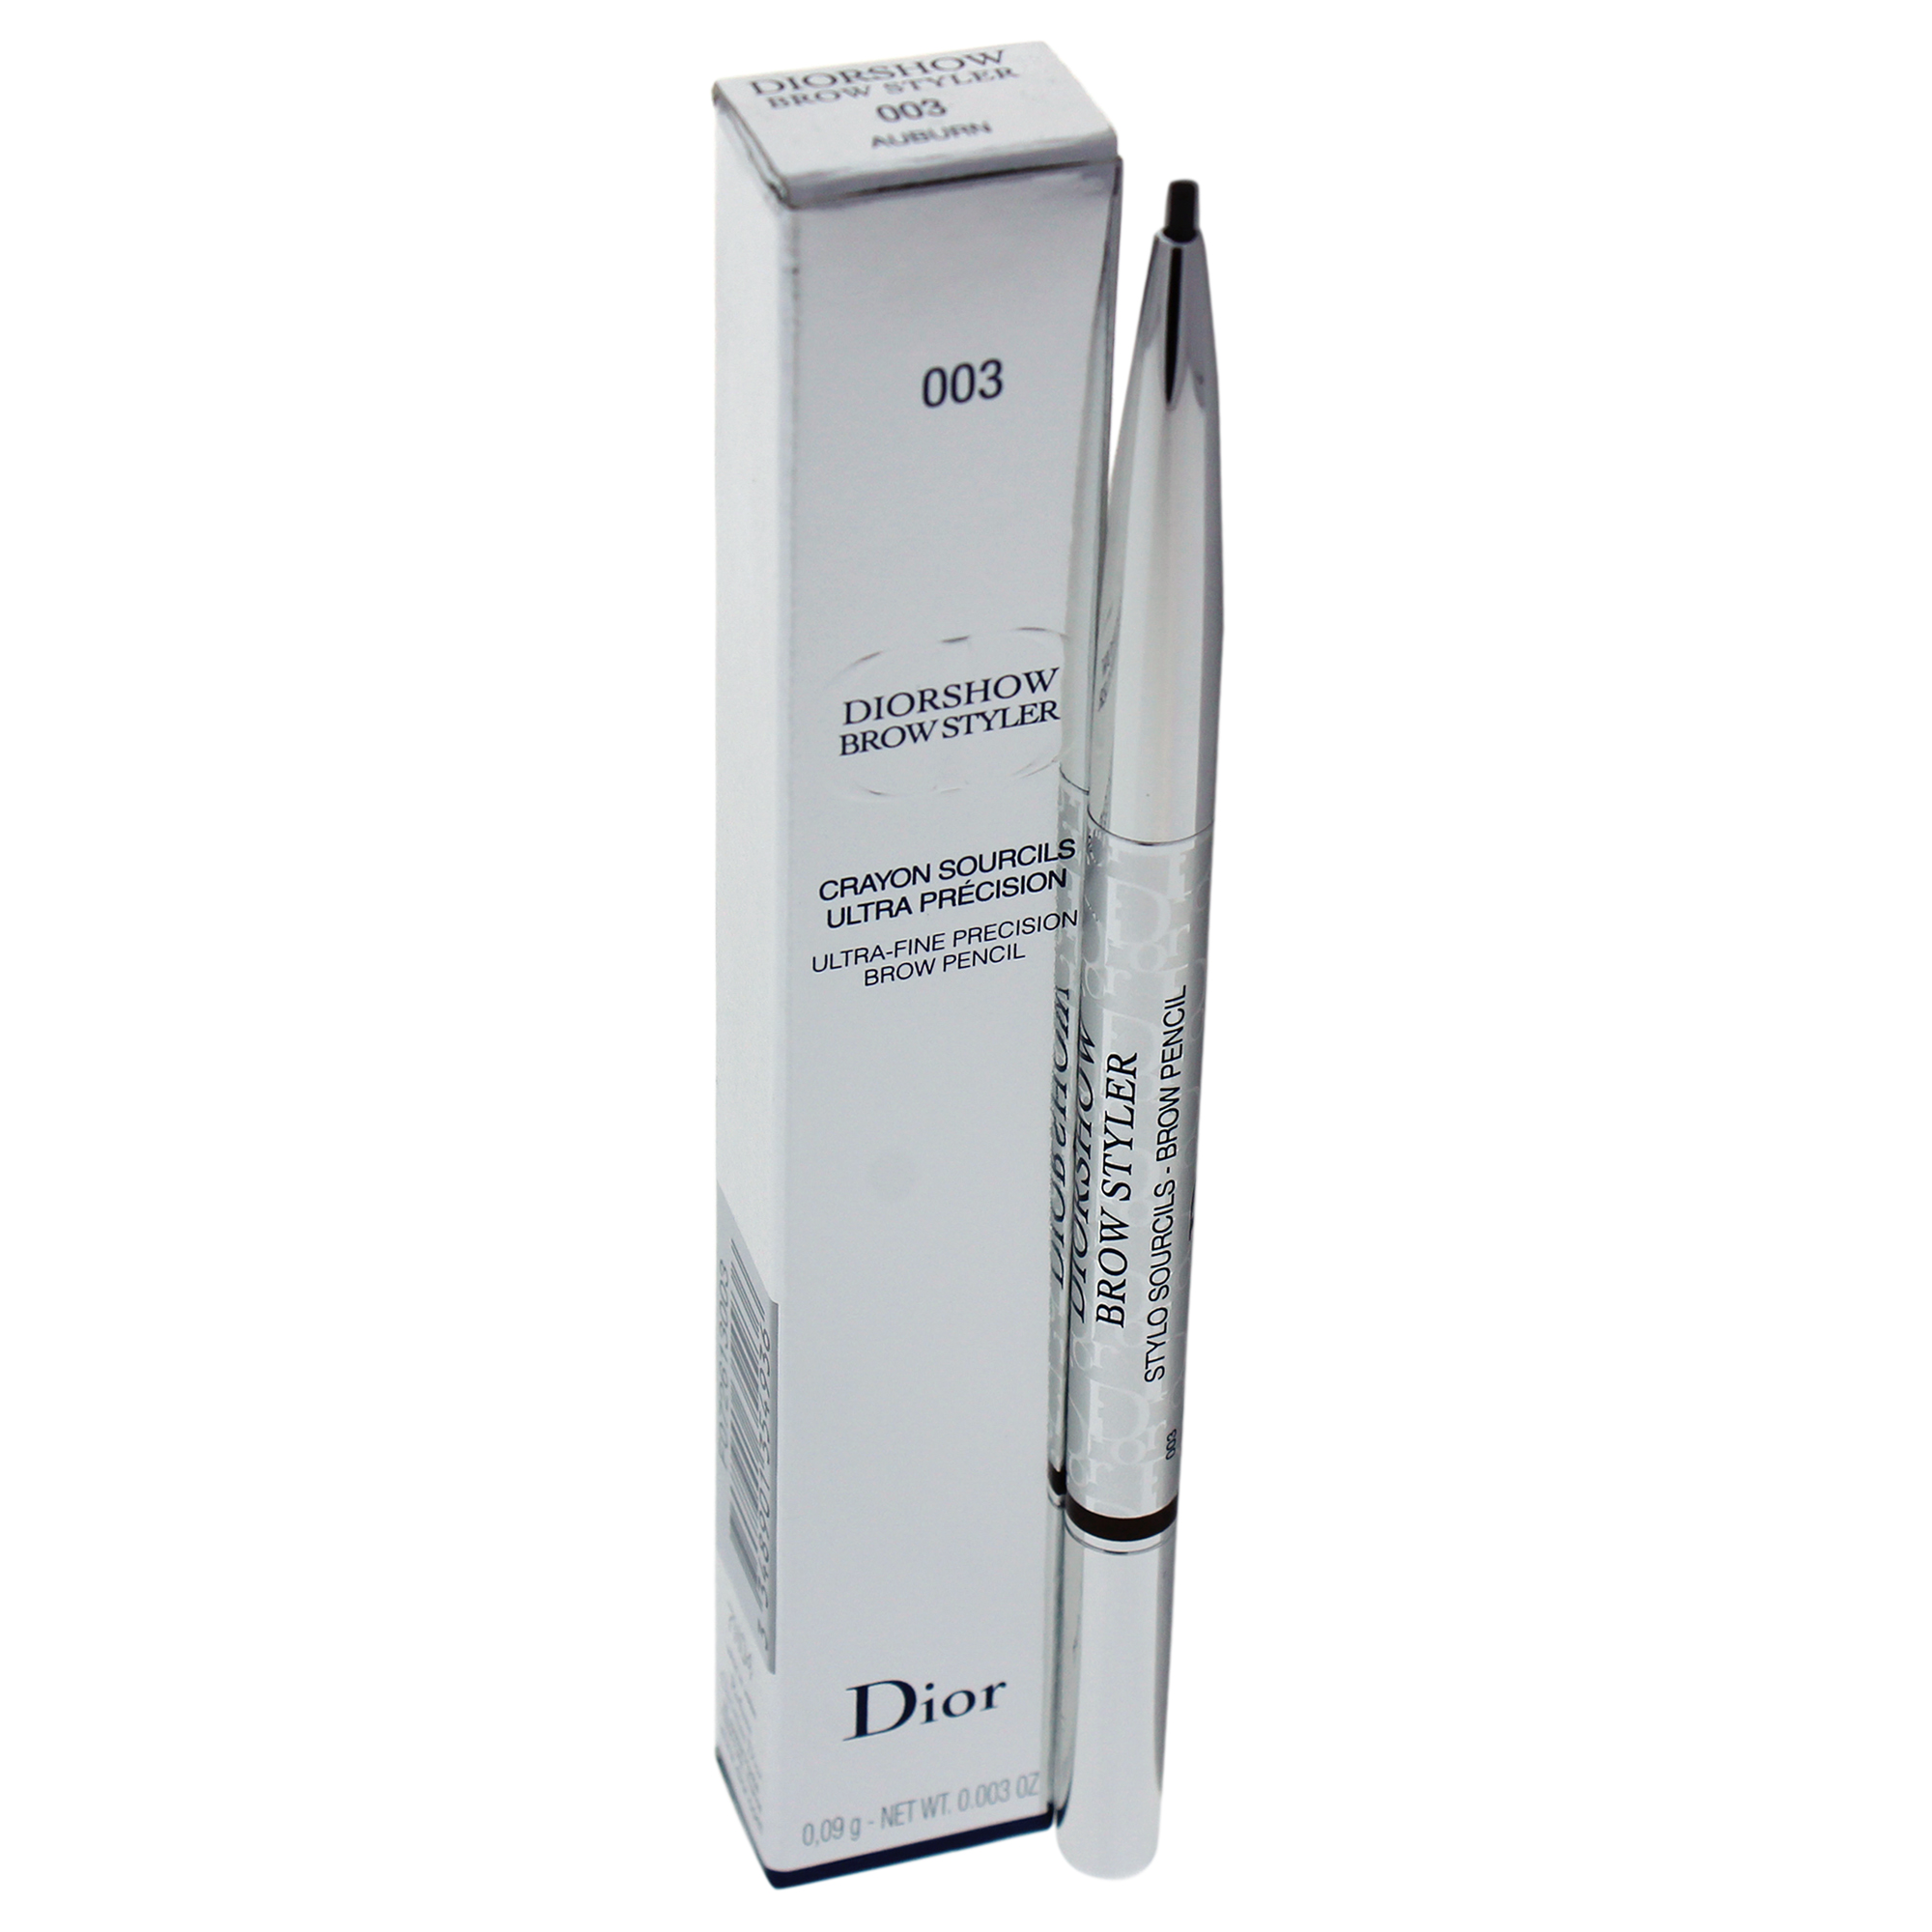 Diorshow Brow Styler Ultra-Fine Precision Brow Pencil - # 003 Auburn by Christian Dior for Women - 0.003 oz Eyebrow Pencil - image 1 of 2